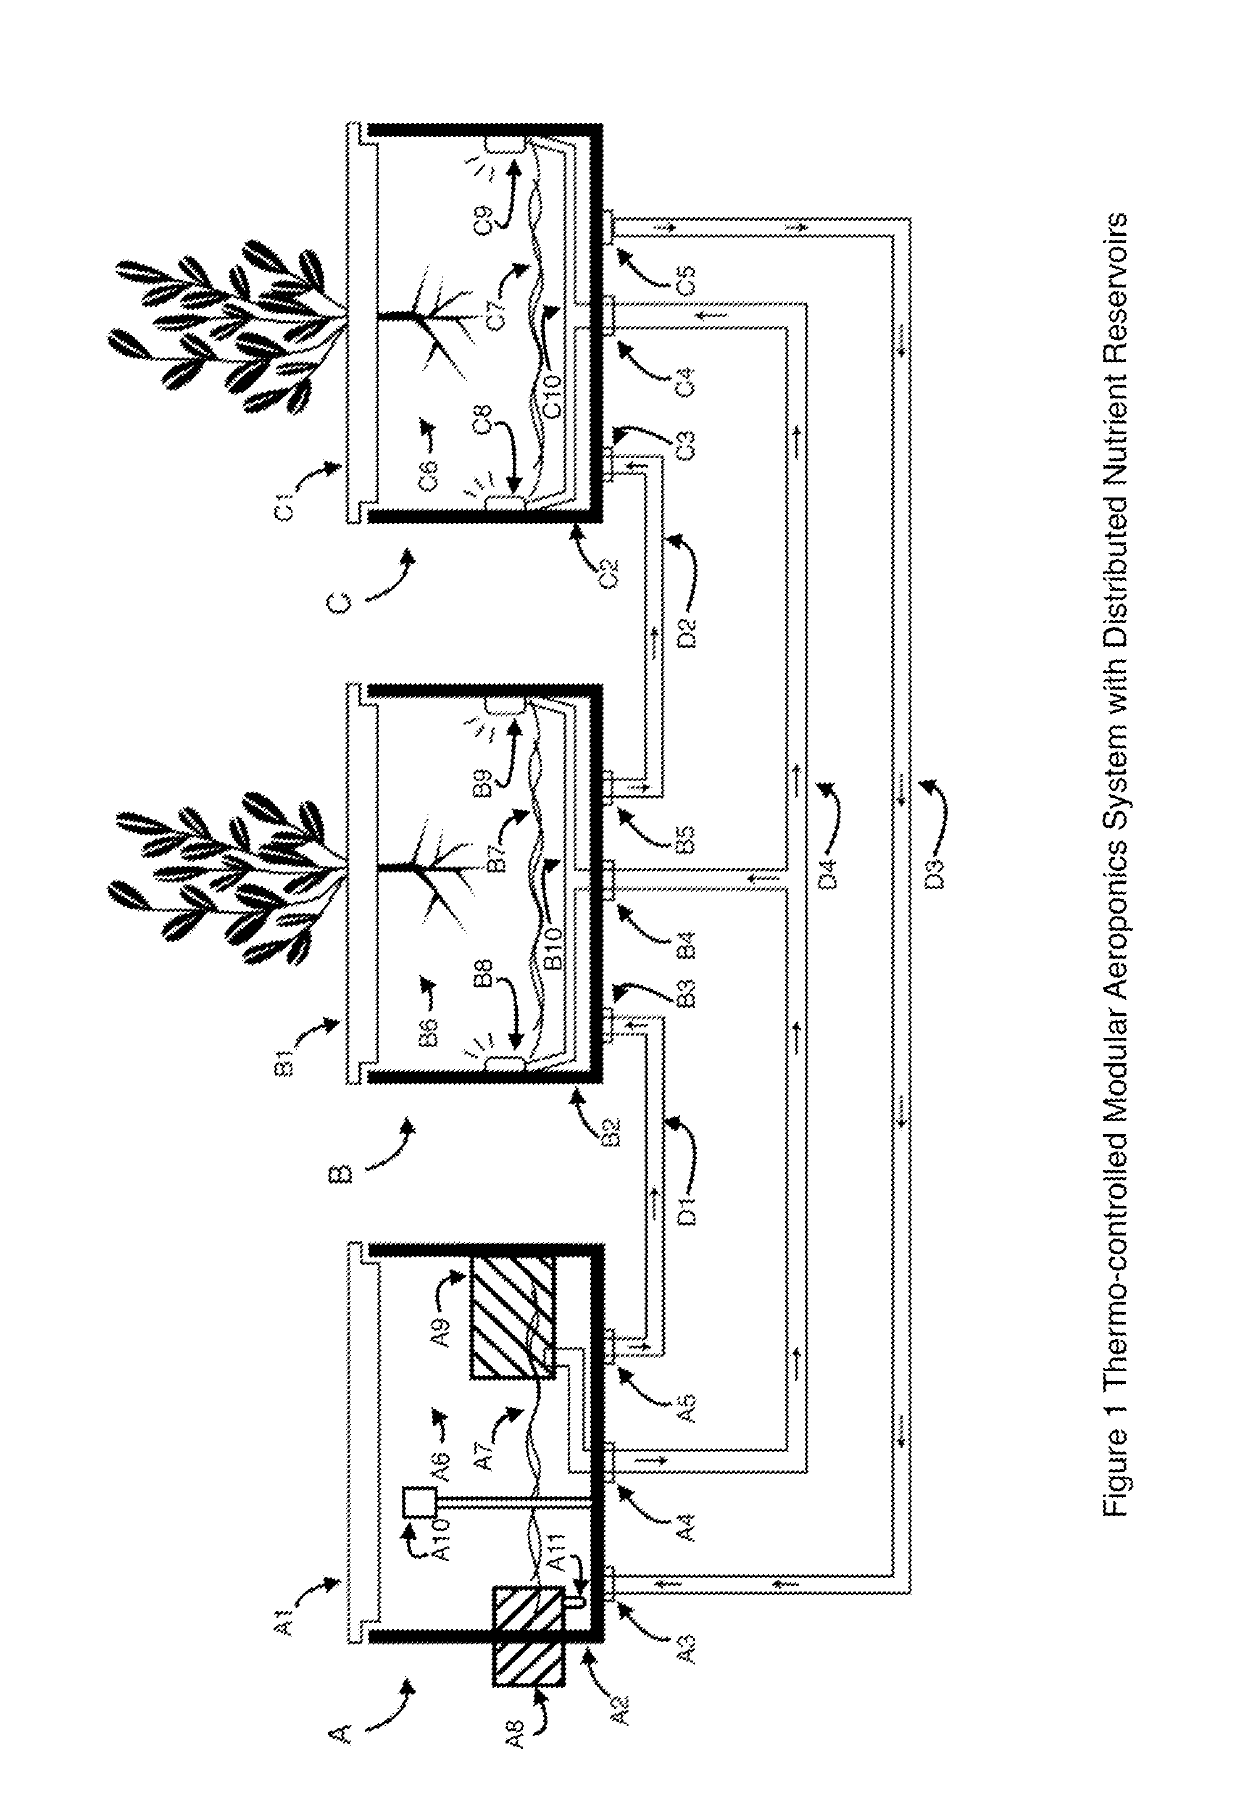 Method and a system of using reservoirs to maintain root temperatures in a modularized aeroponics setup